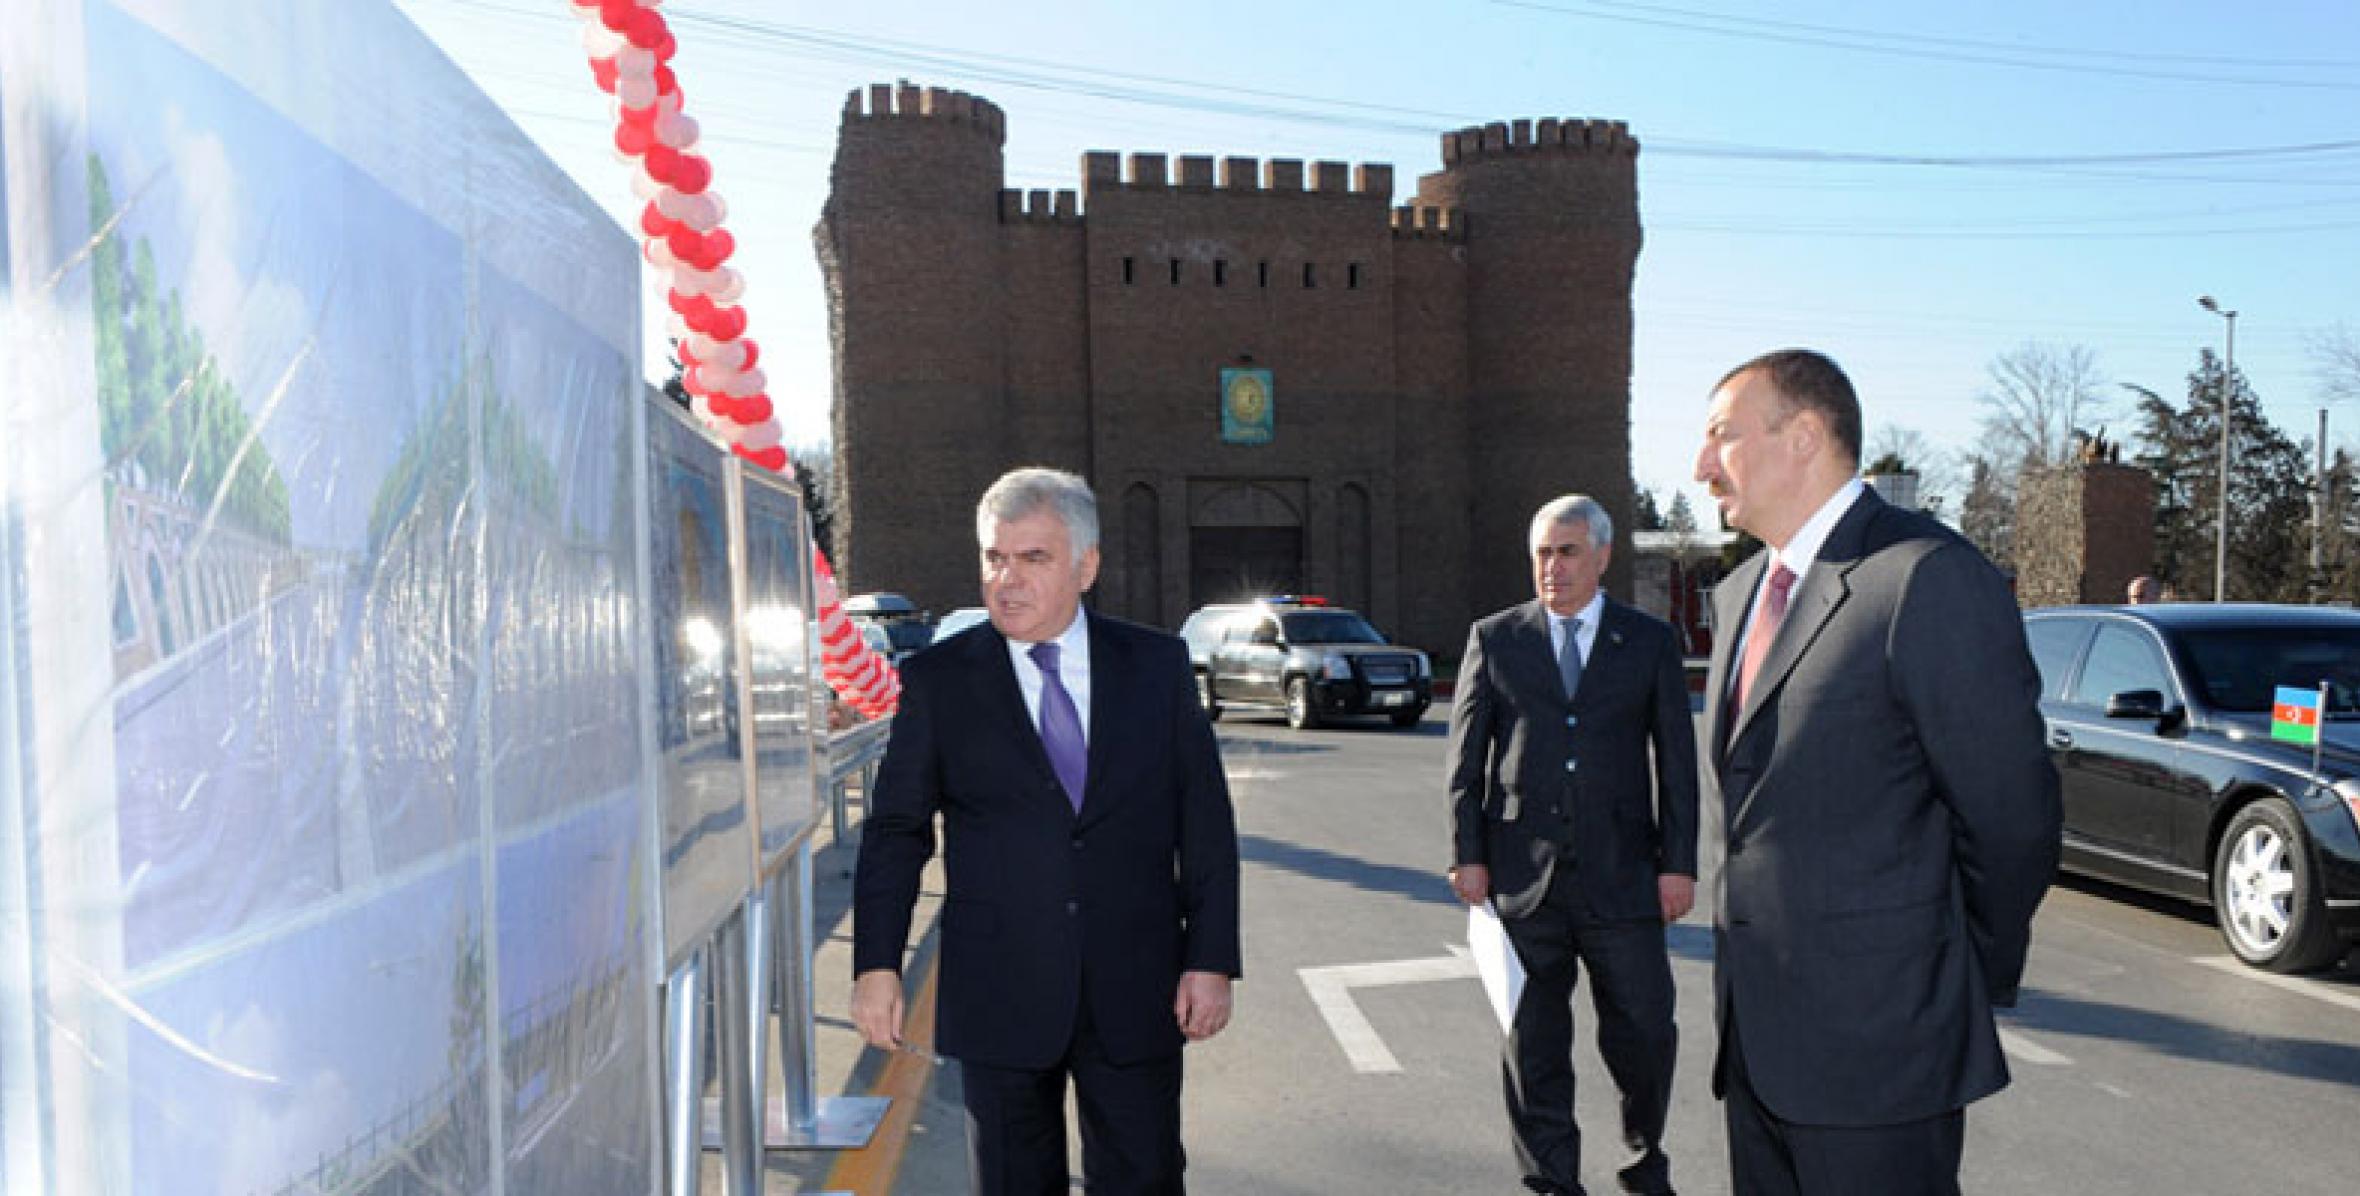 Ilham Aliyev checked out the construction process on the Yevlakh-Ganja road